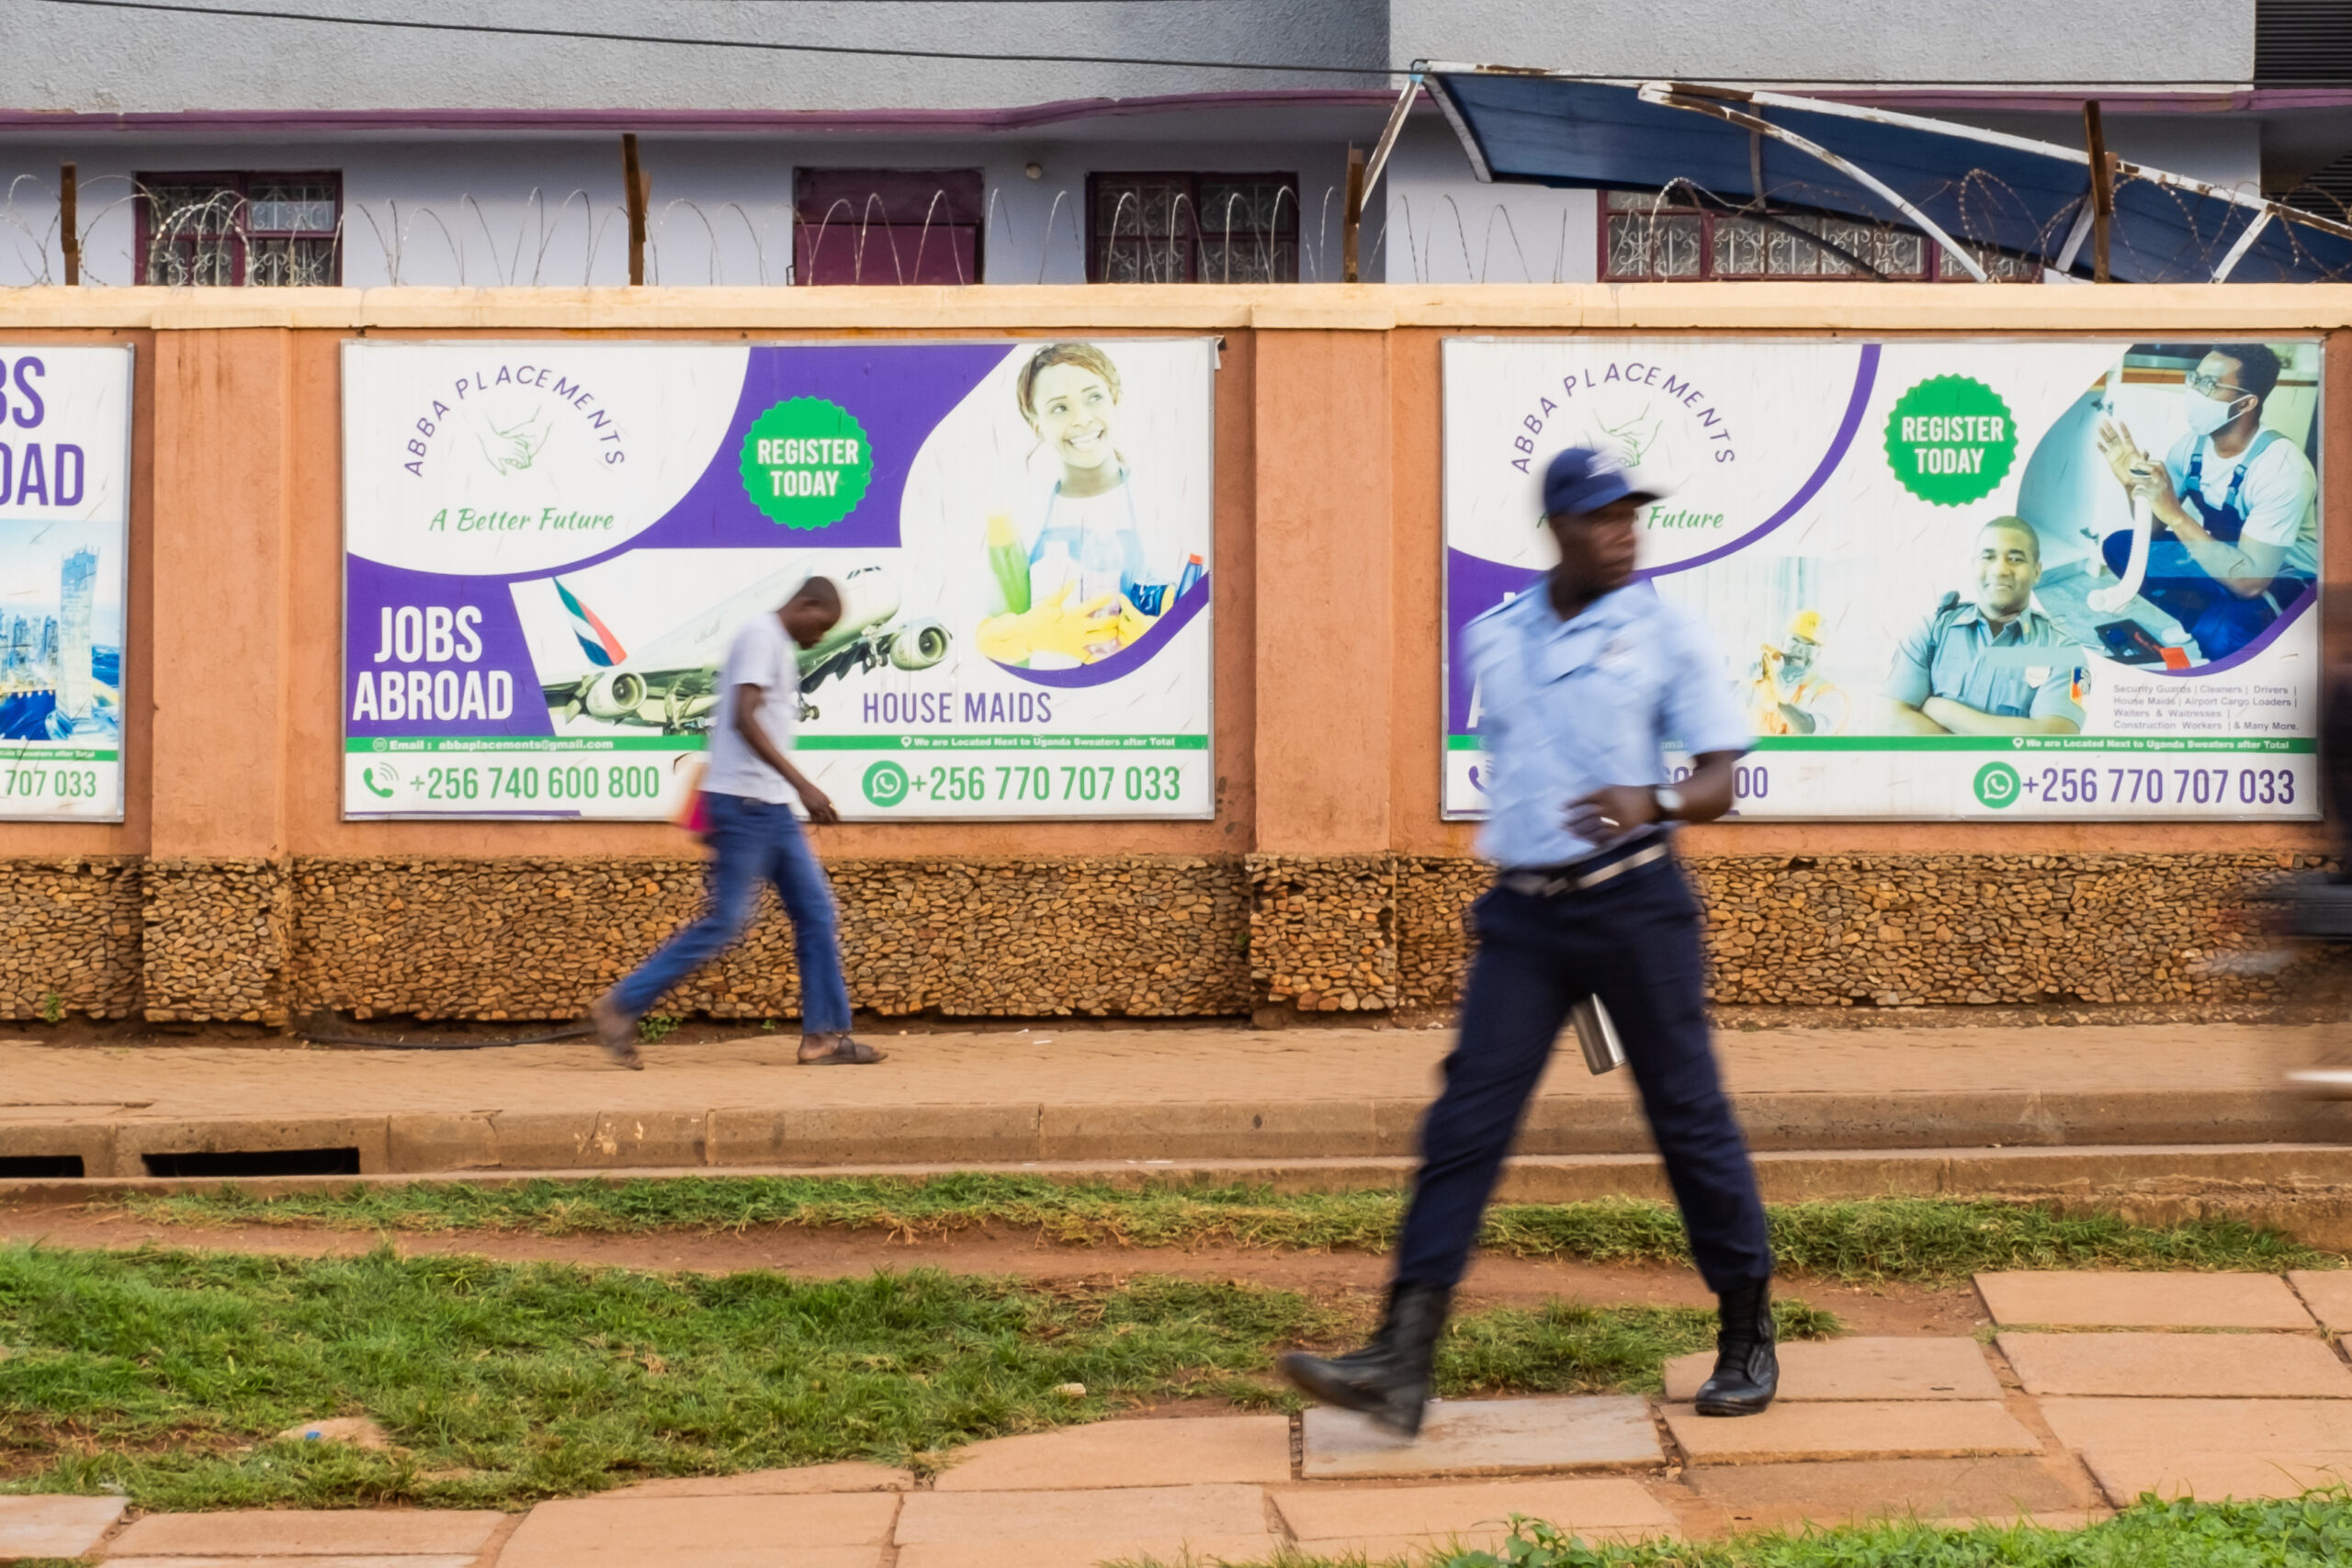 Billboards in downtown Kampala advertising jobs abroad and a better future. Photo by Badru Katumba